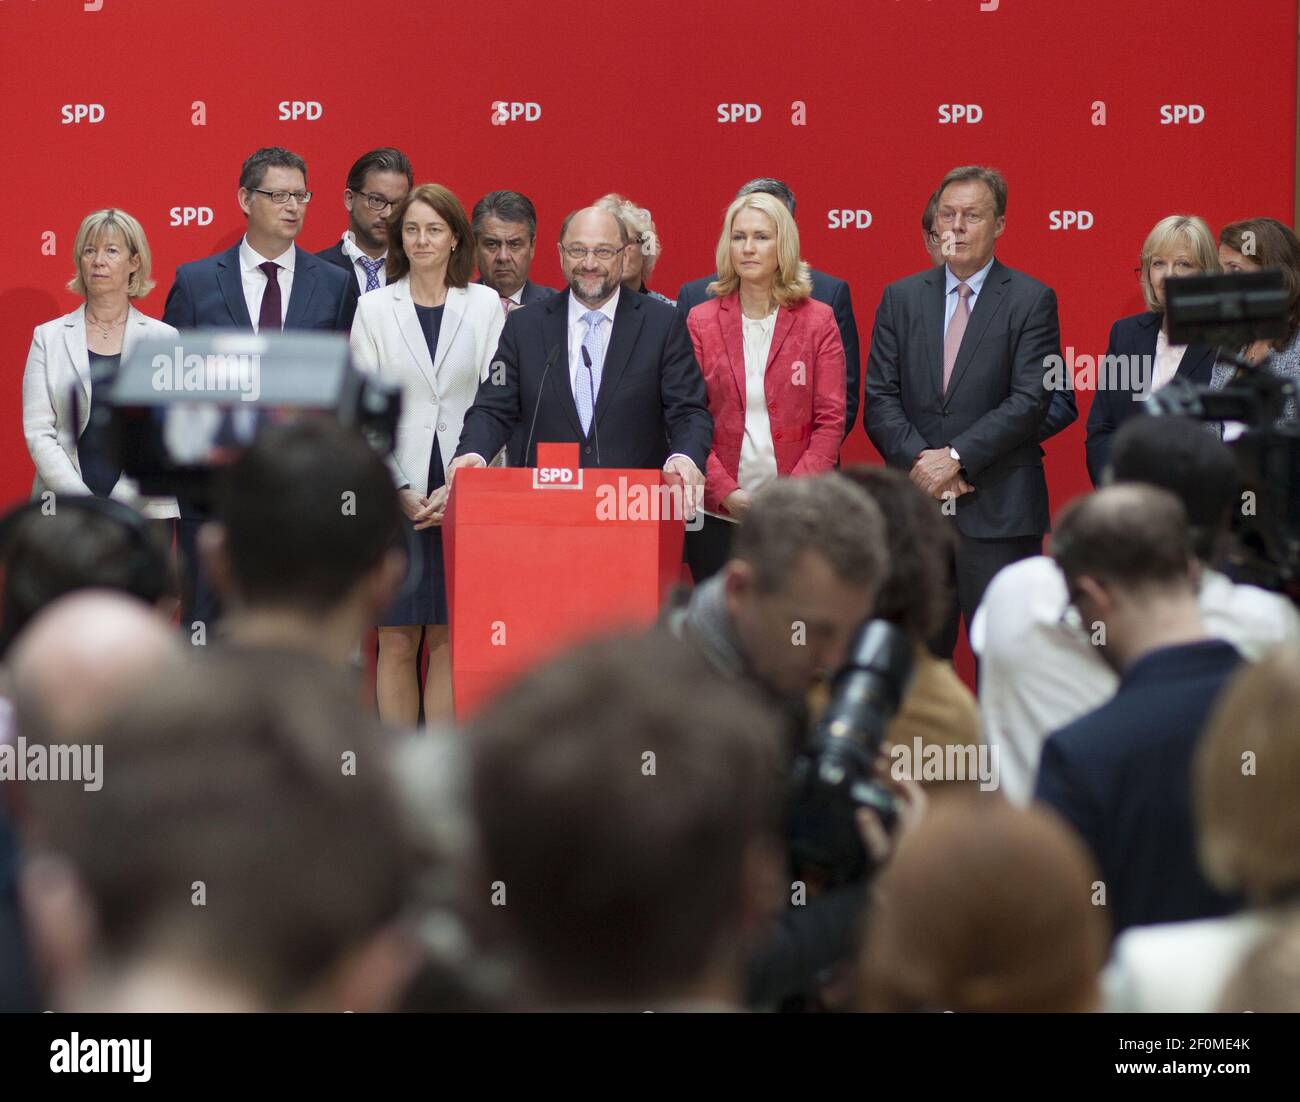 SPD Chancellor candidate Martin Schulz and the SPD candidate to the German state of NRW, Hannelore Kraft are addressing his party's supporters and members of the press the day after the local elections in North Rhine-Westphalia, on May 15, 2017. (Photo by Omer Messinger) *** Please Use Credit from Credit Field ***  Stock Photo